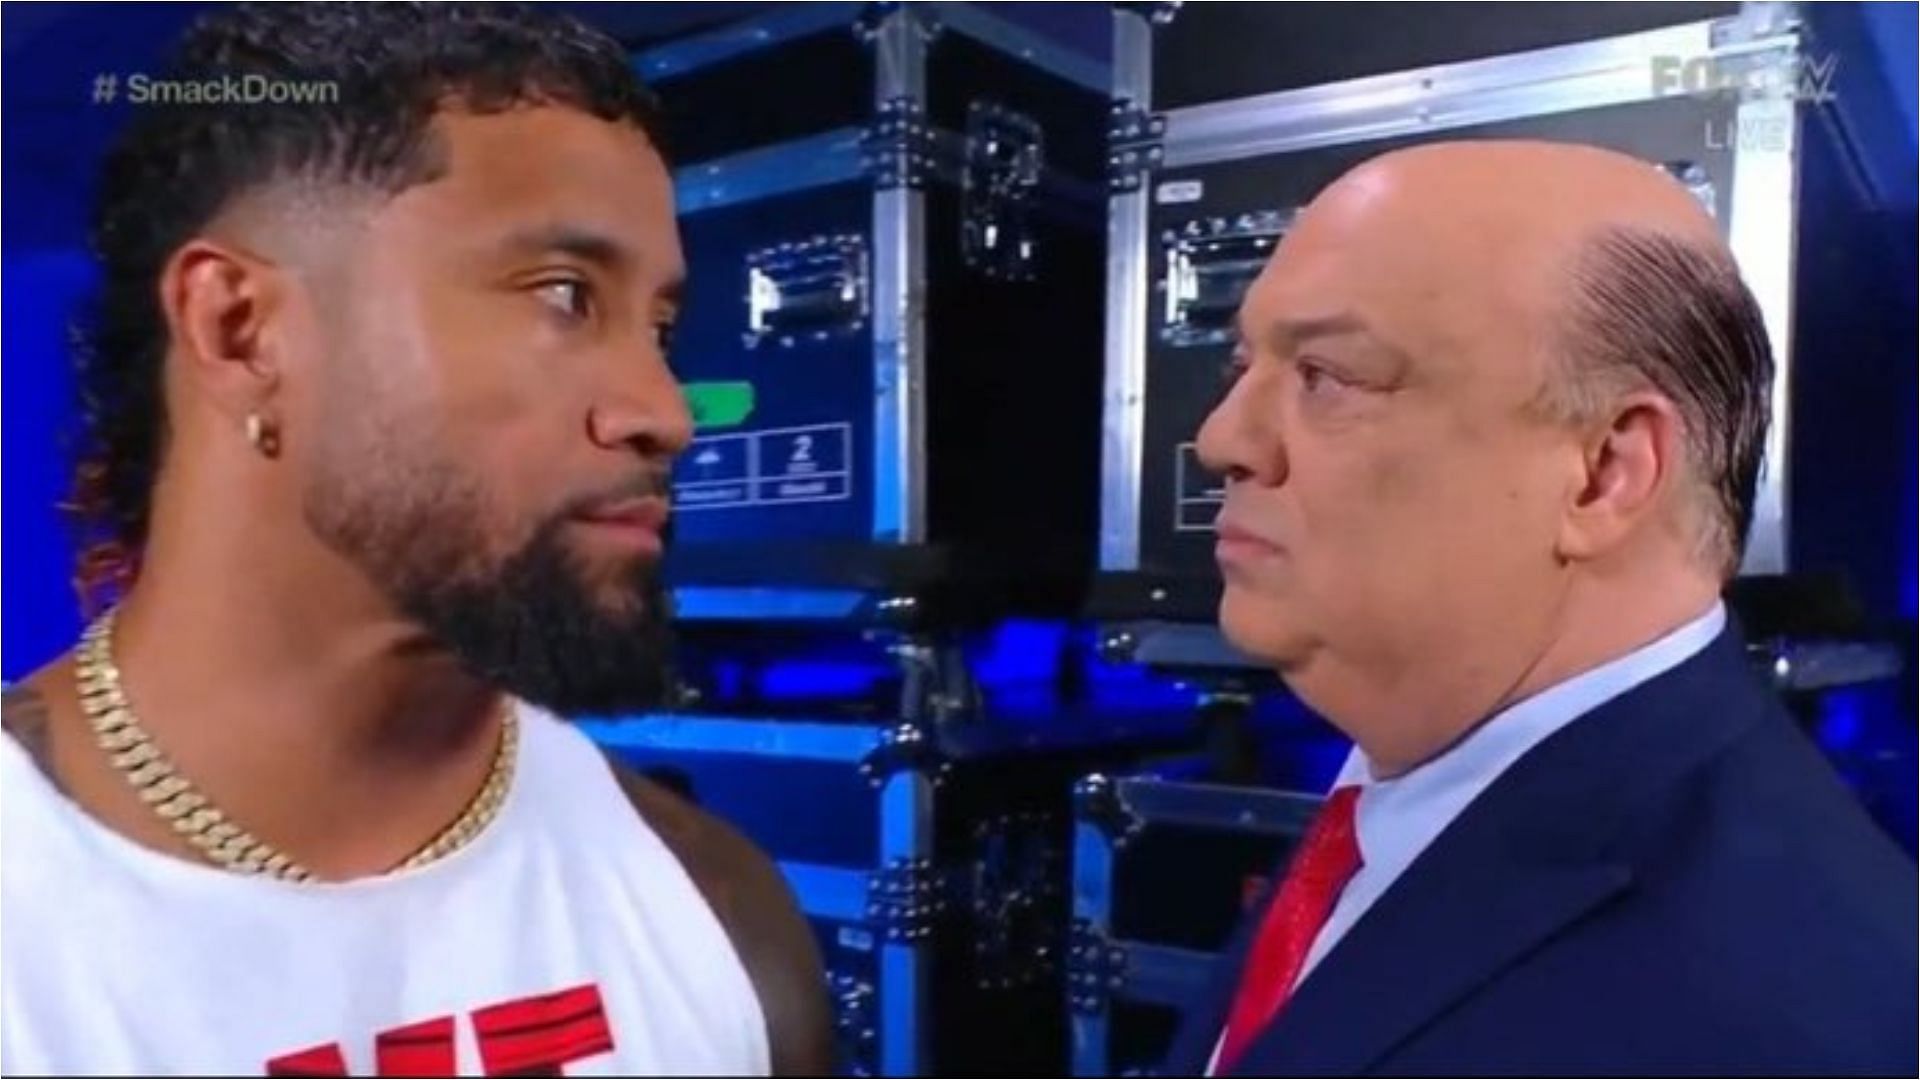 Jey Uso and Paul Heyman were both involved in some juicy teases as The Bloodline imploded